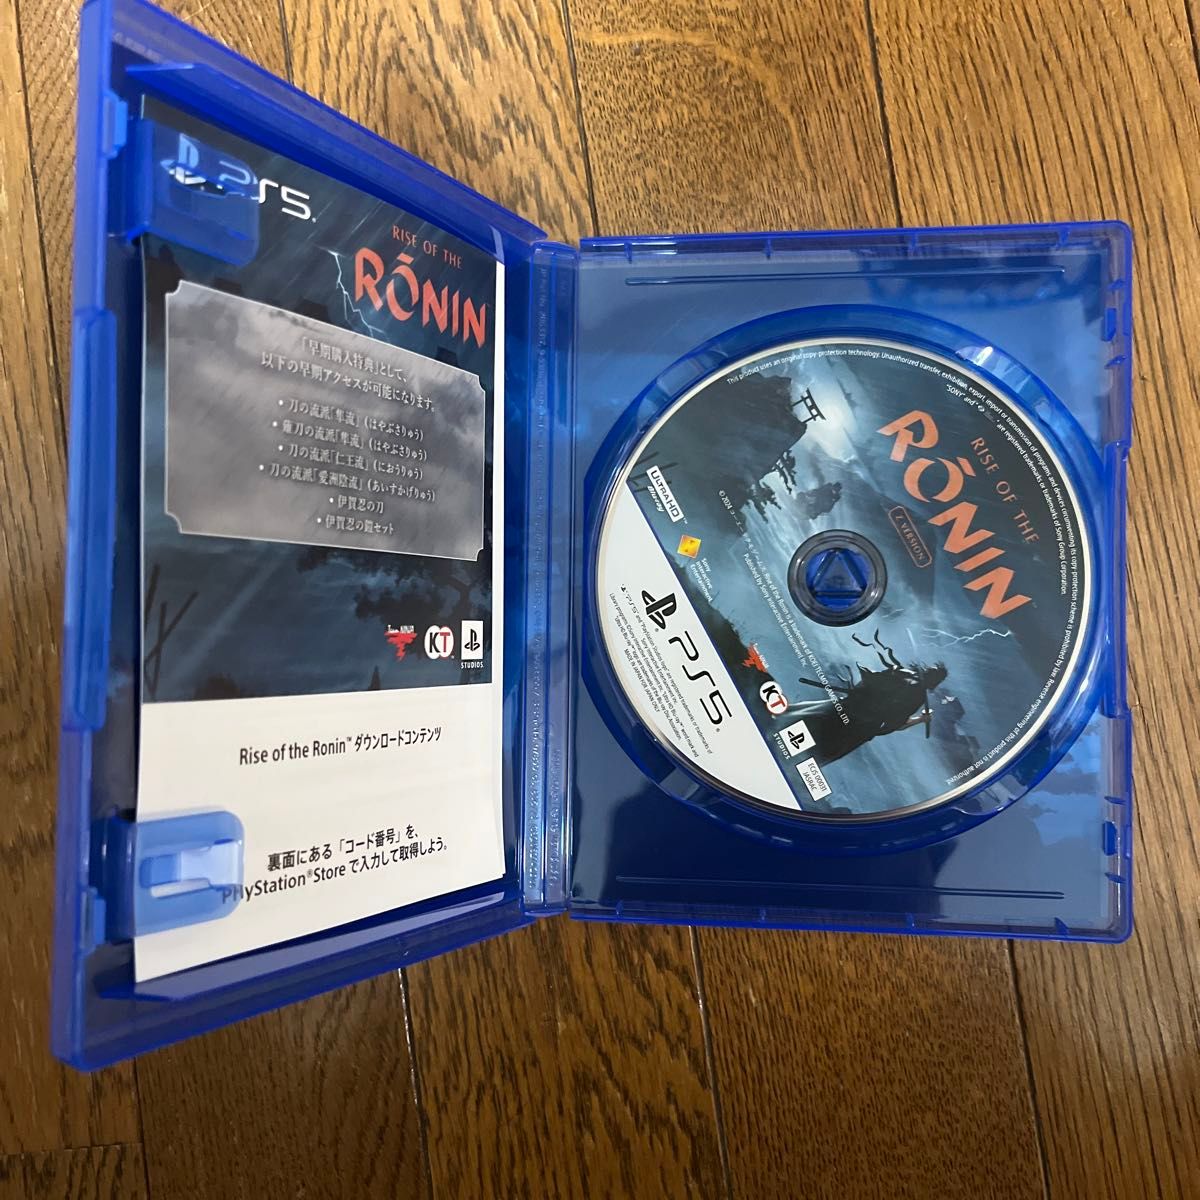 ［PS5］RISE OF THE RONIN Z VERSION  ローニン　コード未使用